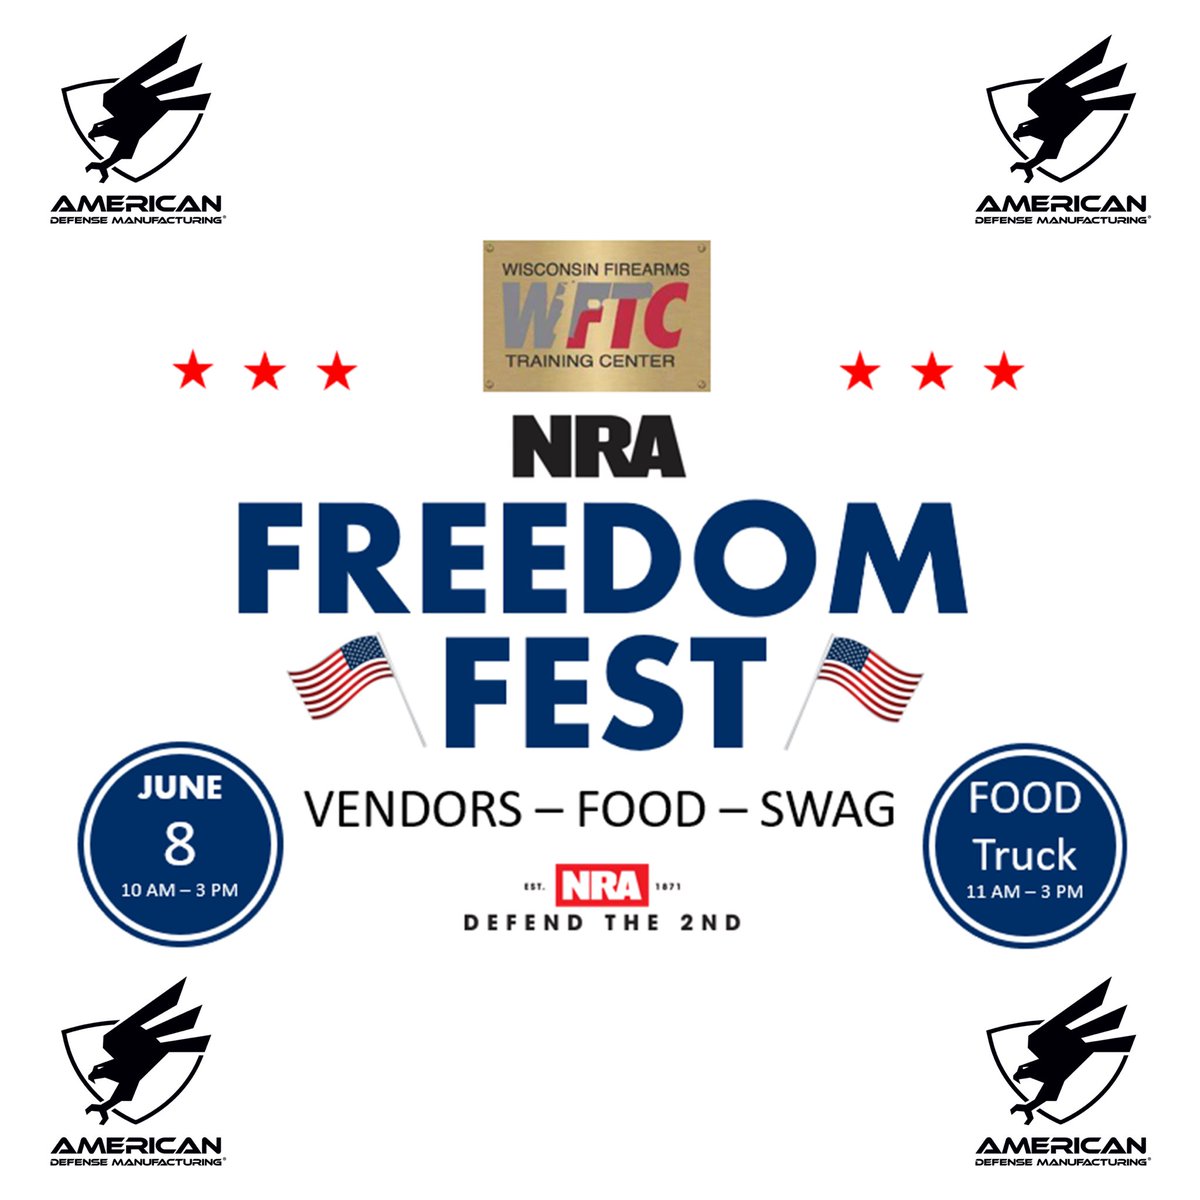 Stop by and check out our new products on display at Wisconsin Firearms Training Center in Brookfield, WI on June 8th!